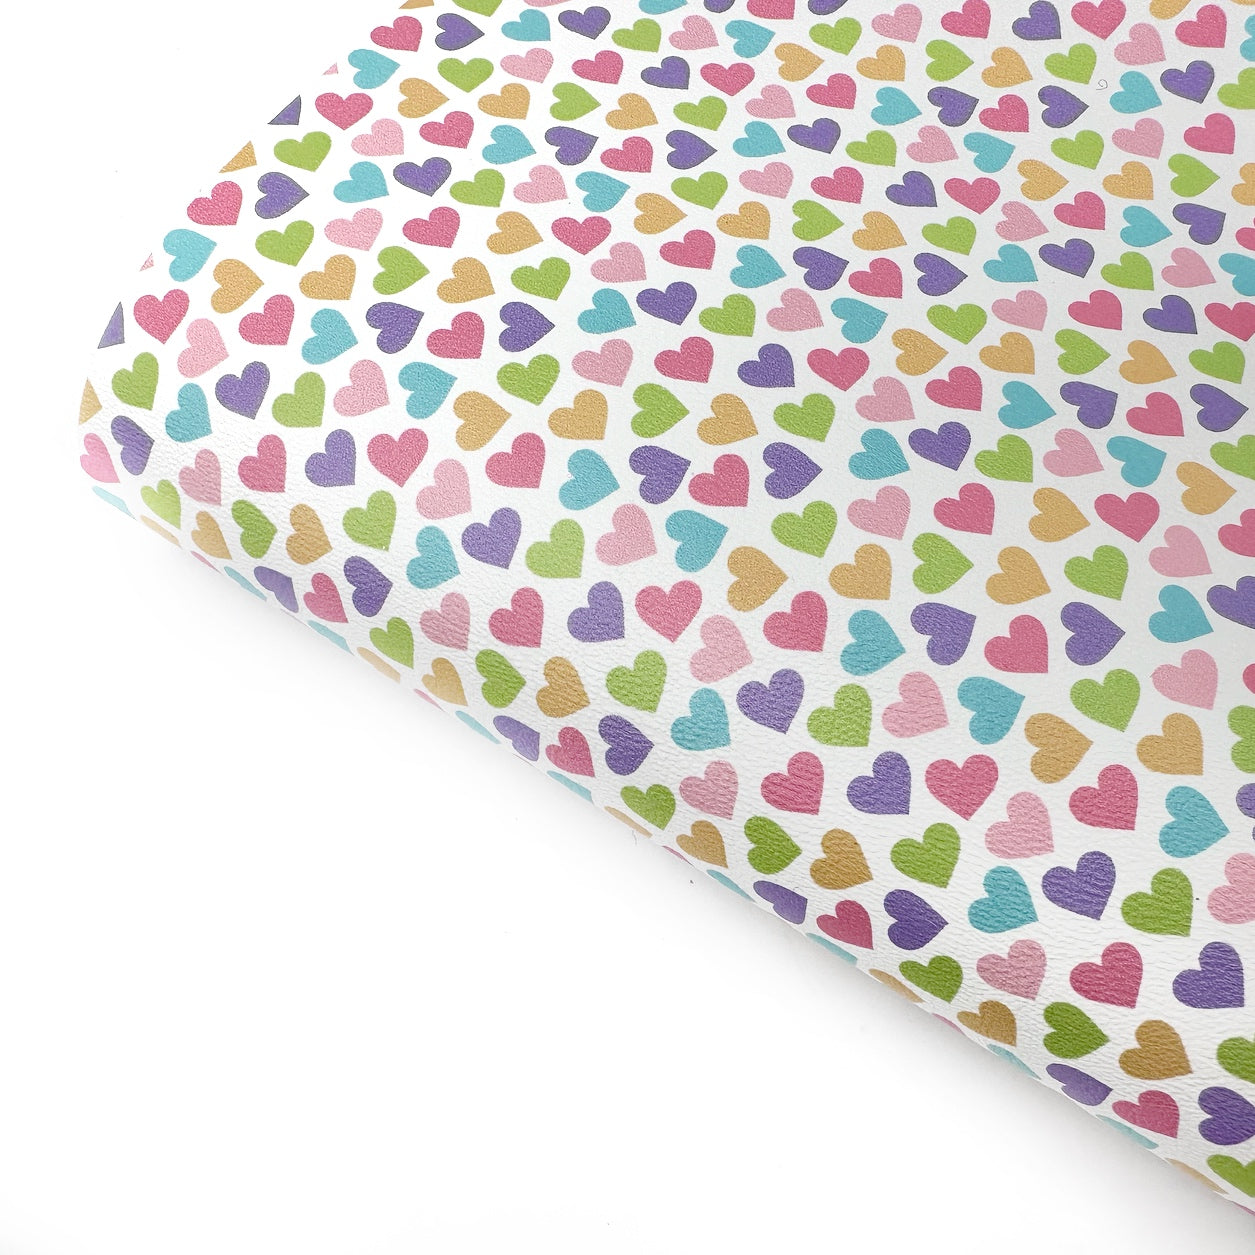 Soft Rainbow Hearts Premium Faux Leather Fabric Sheets